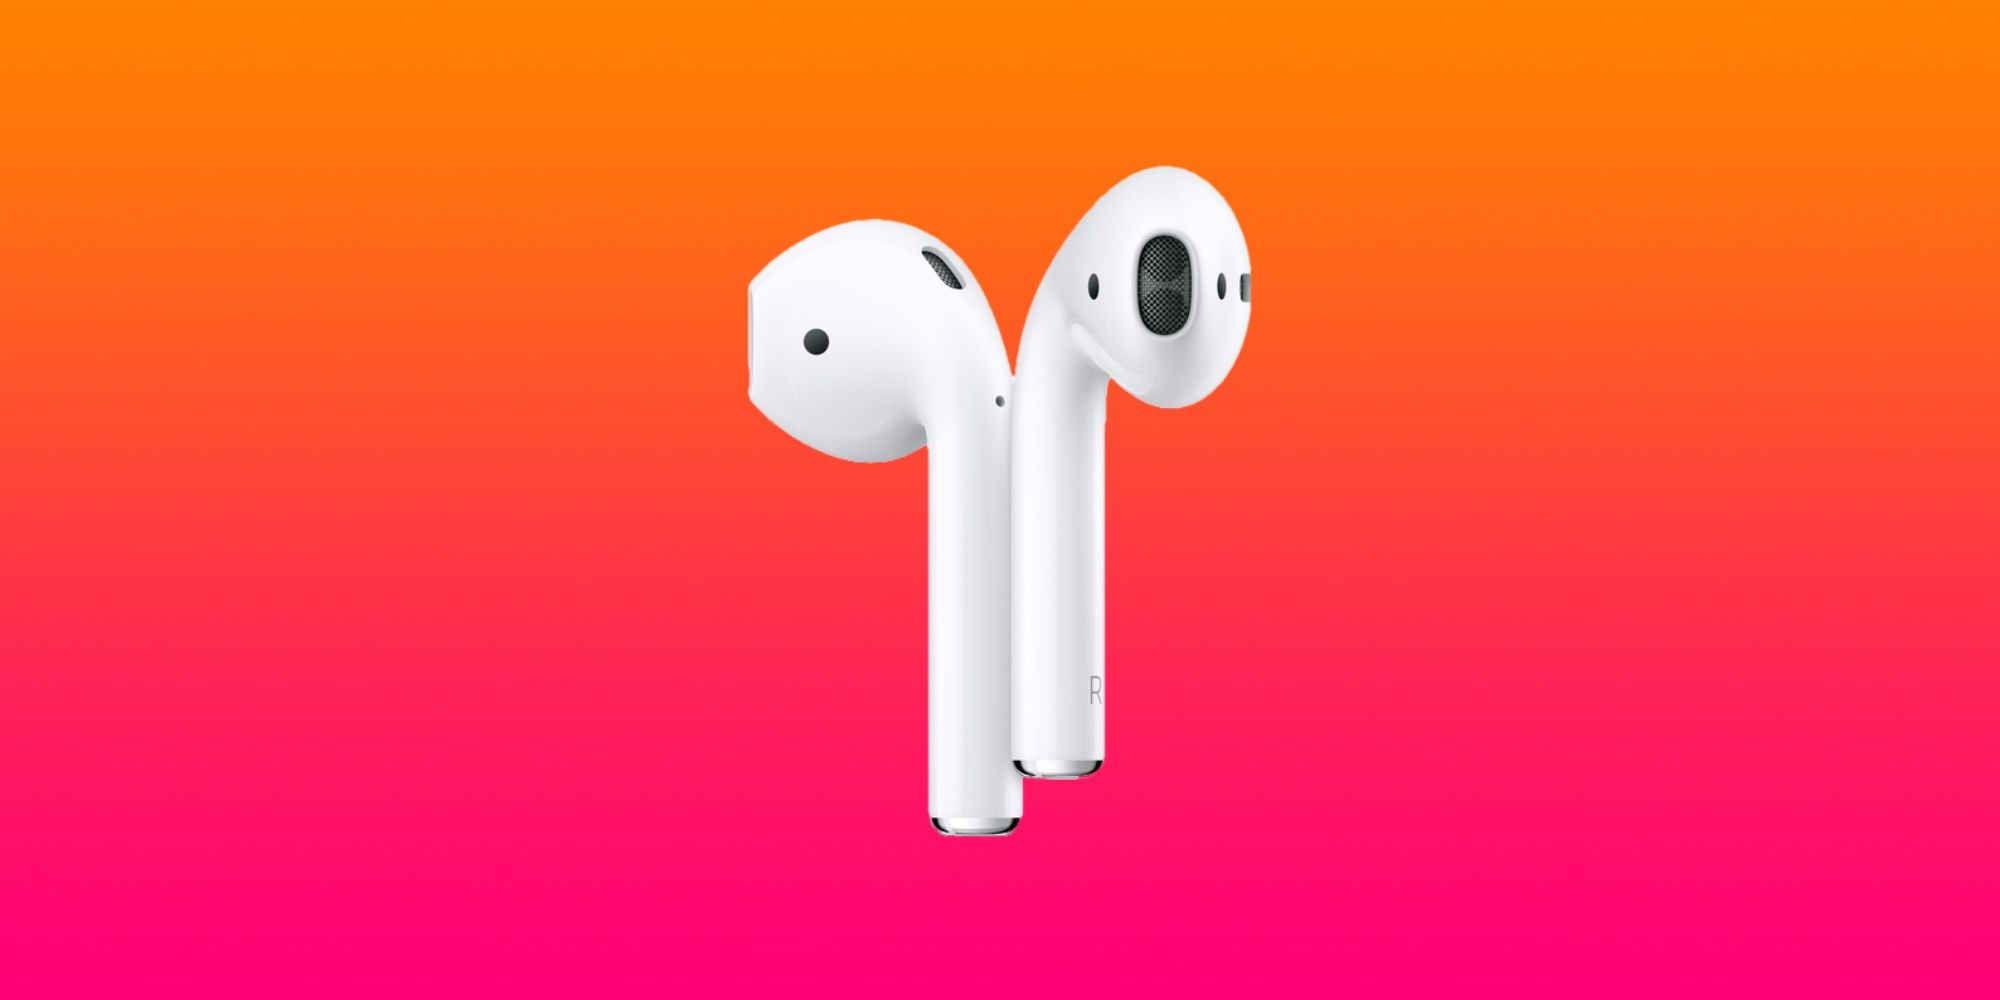 Should You Buy Apple's 2nd-Generation AirPods In 2022?